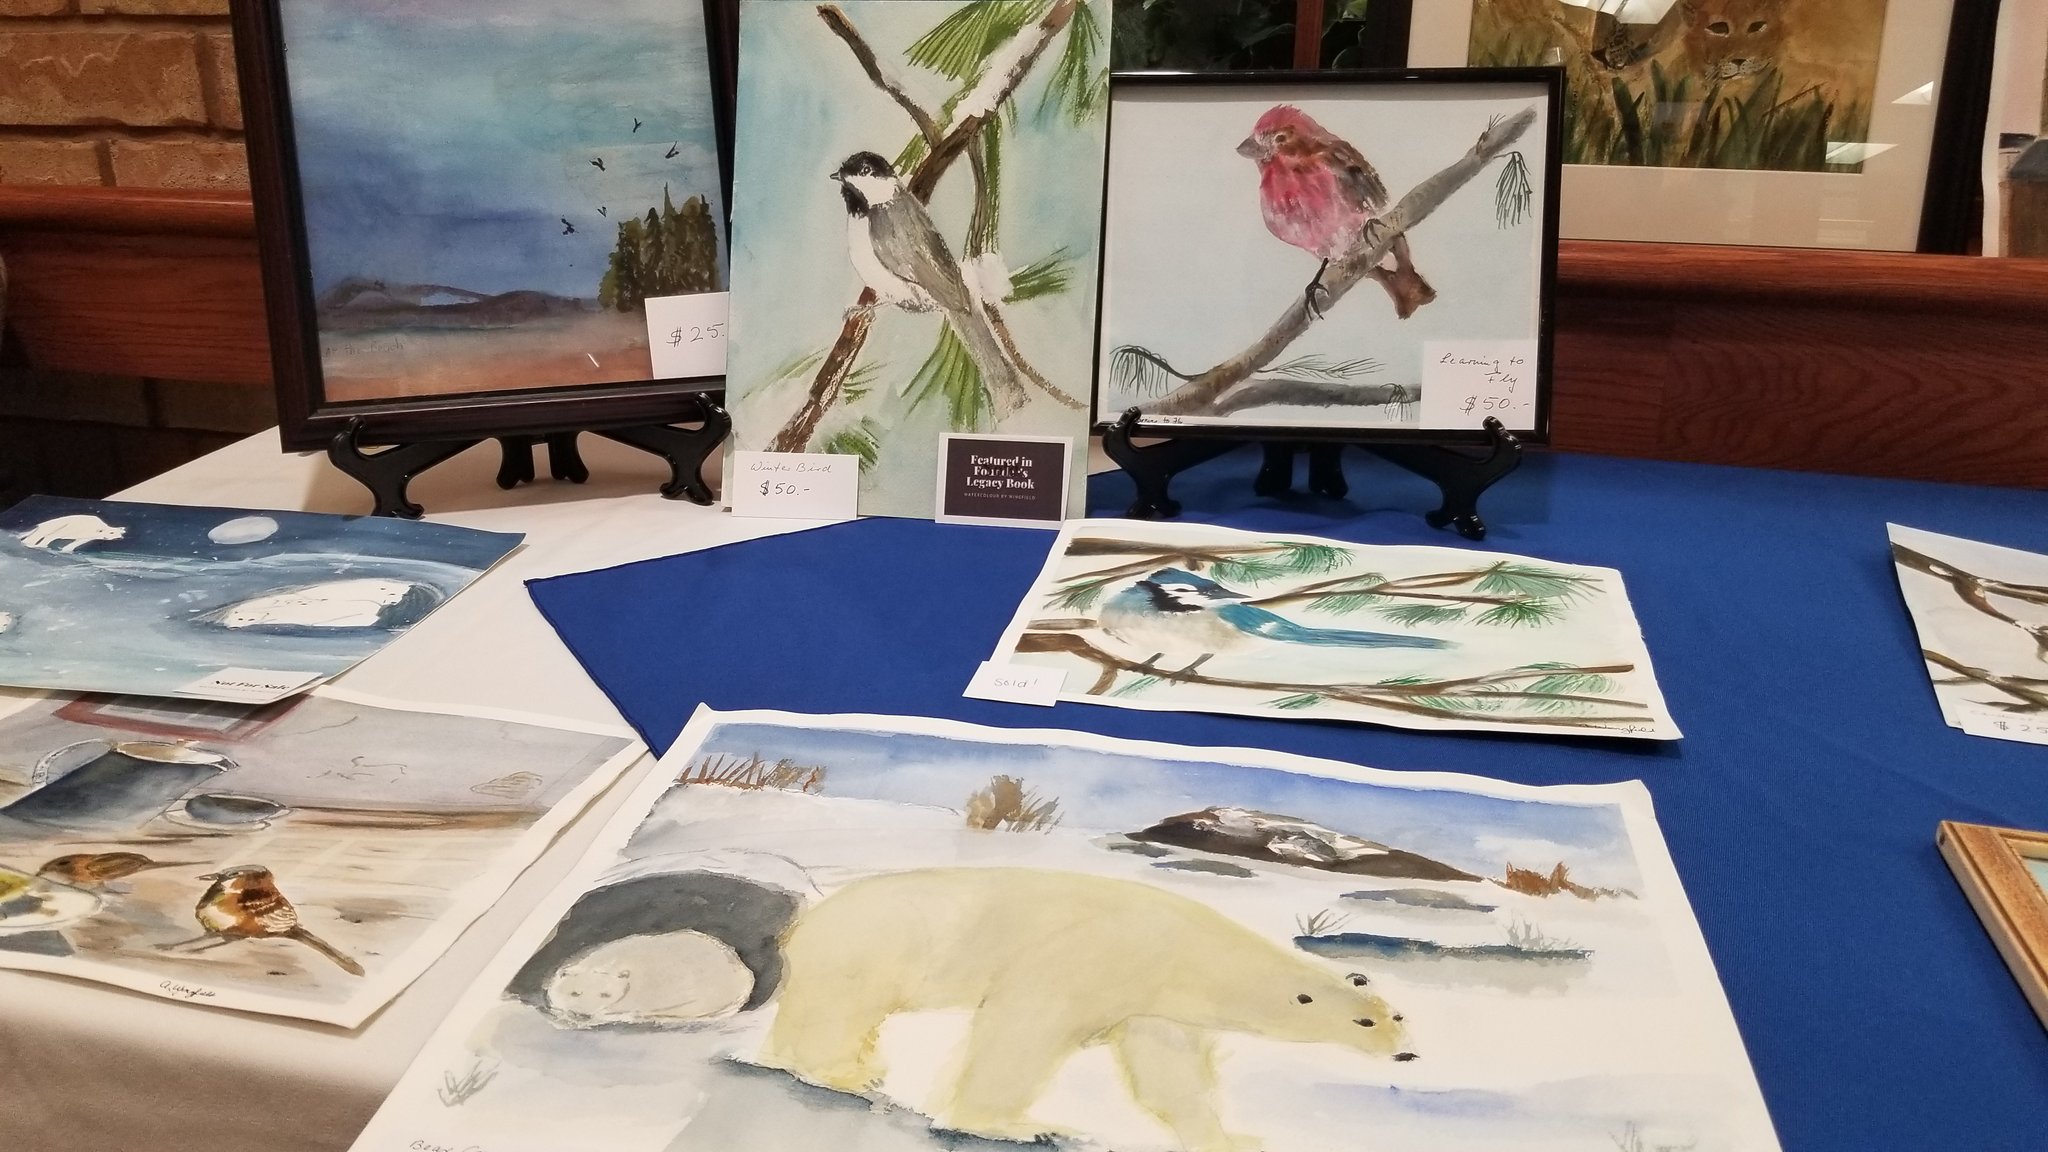 Days before the provincial COVID-19 lockdown was imposed, artist Ann Wingfield was featured in an art show in her home Village of Wentworth Heights.